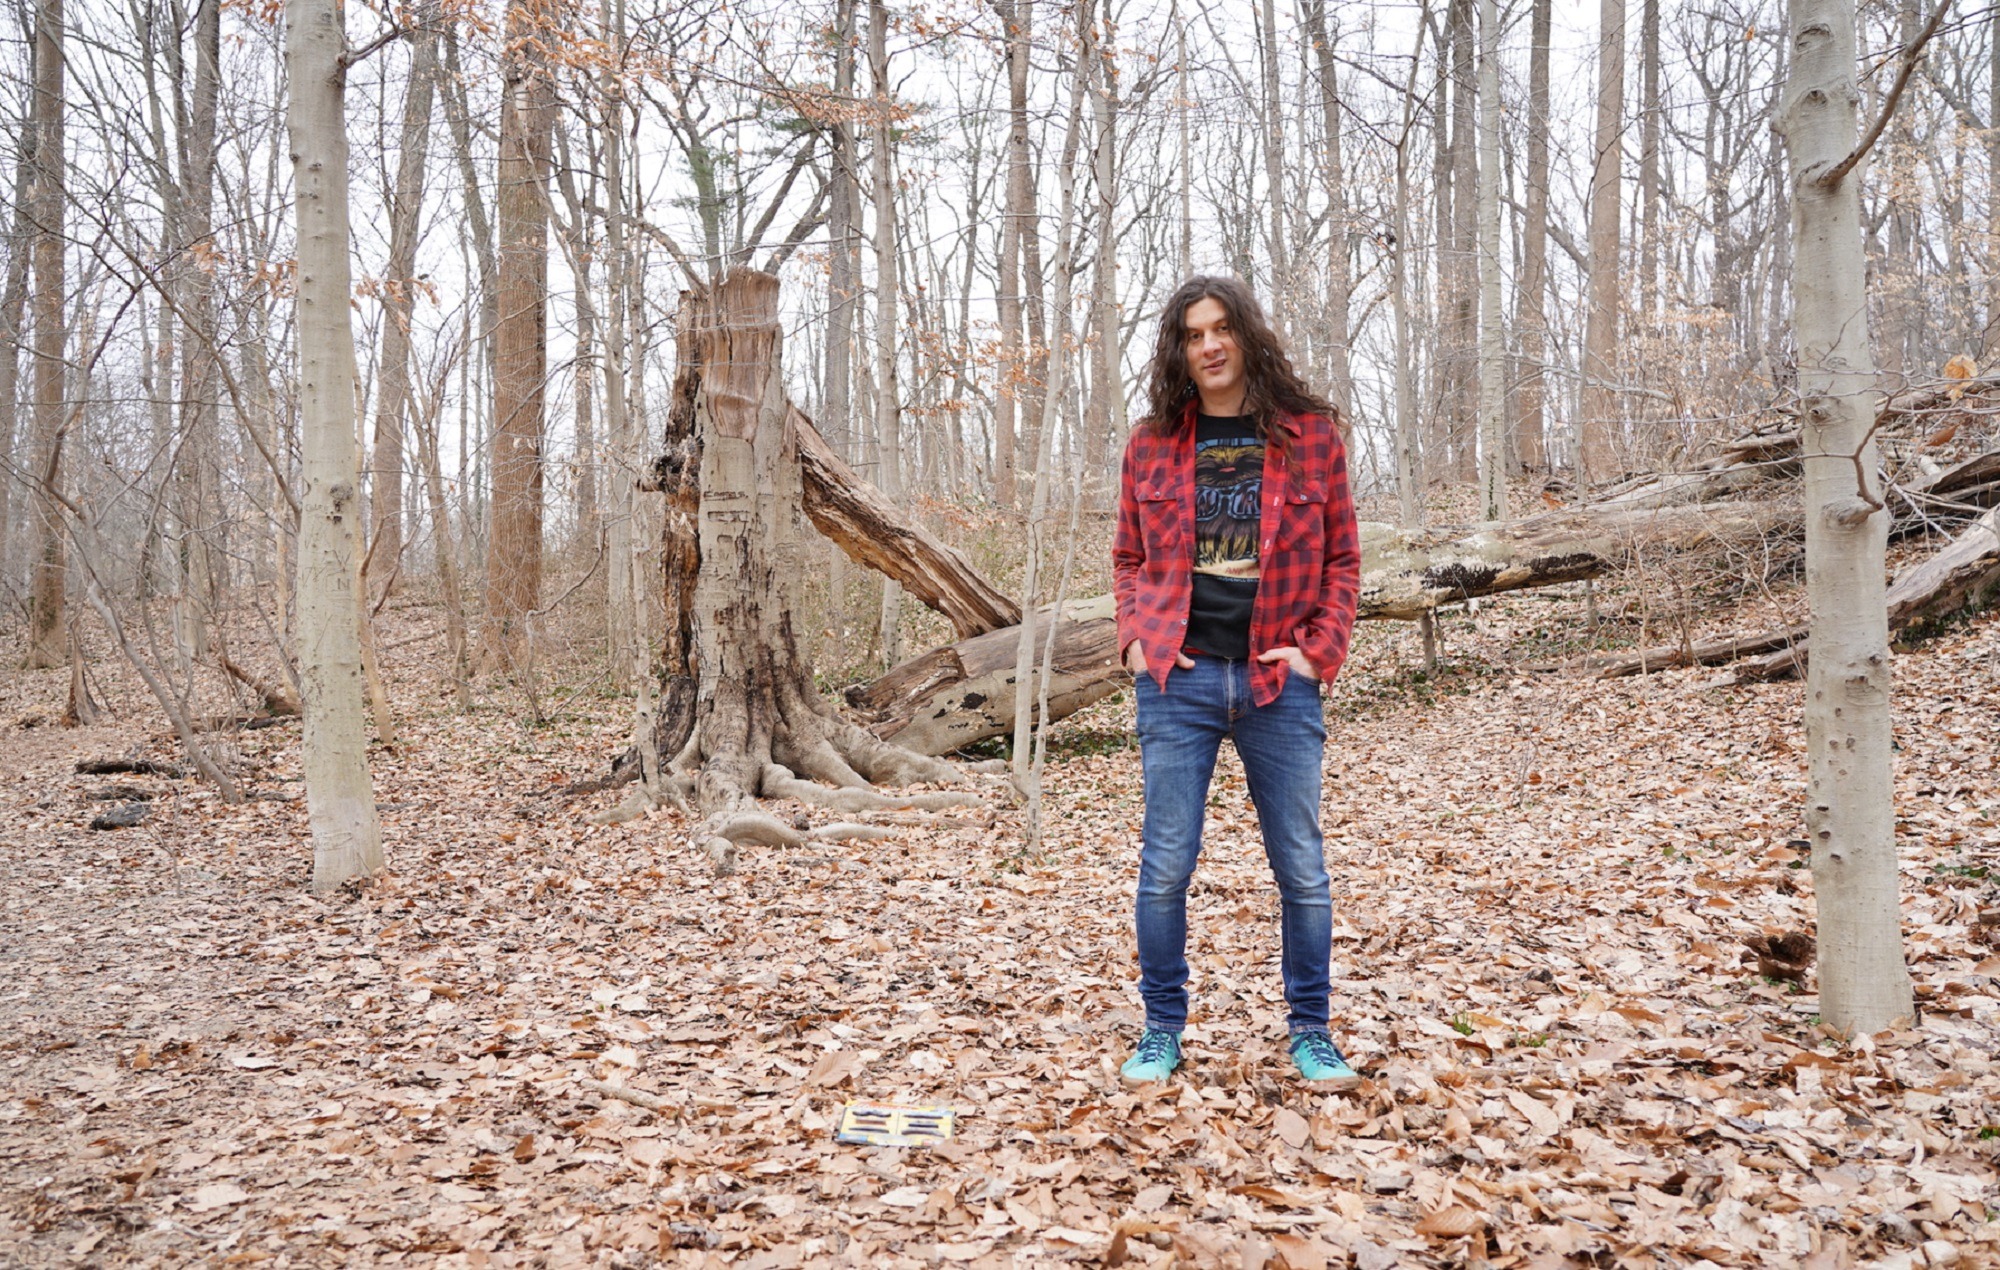 Kurt Vile on new single ‘Like Exploding Stones’ and new album ‘watch my moves’